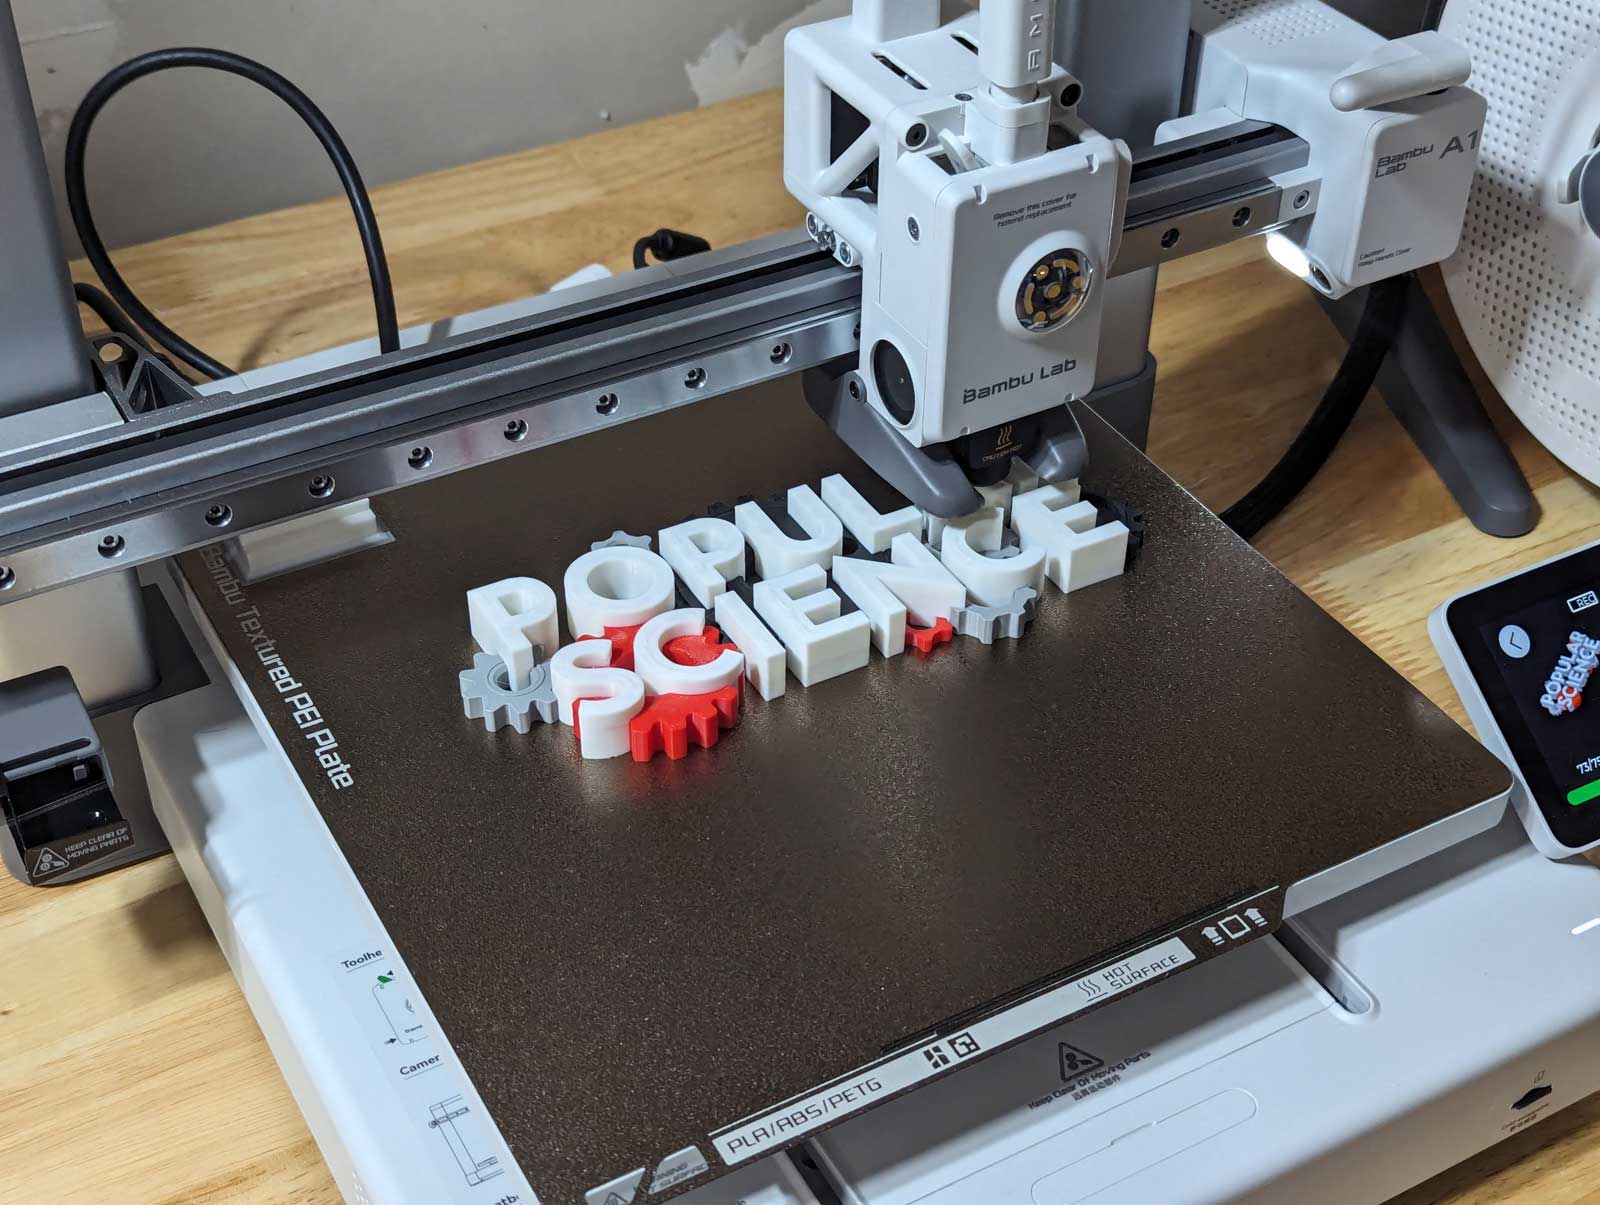 Bambu Labs A1 3D Printer with a print in-progress on its bed